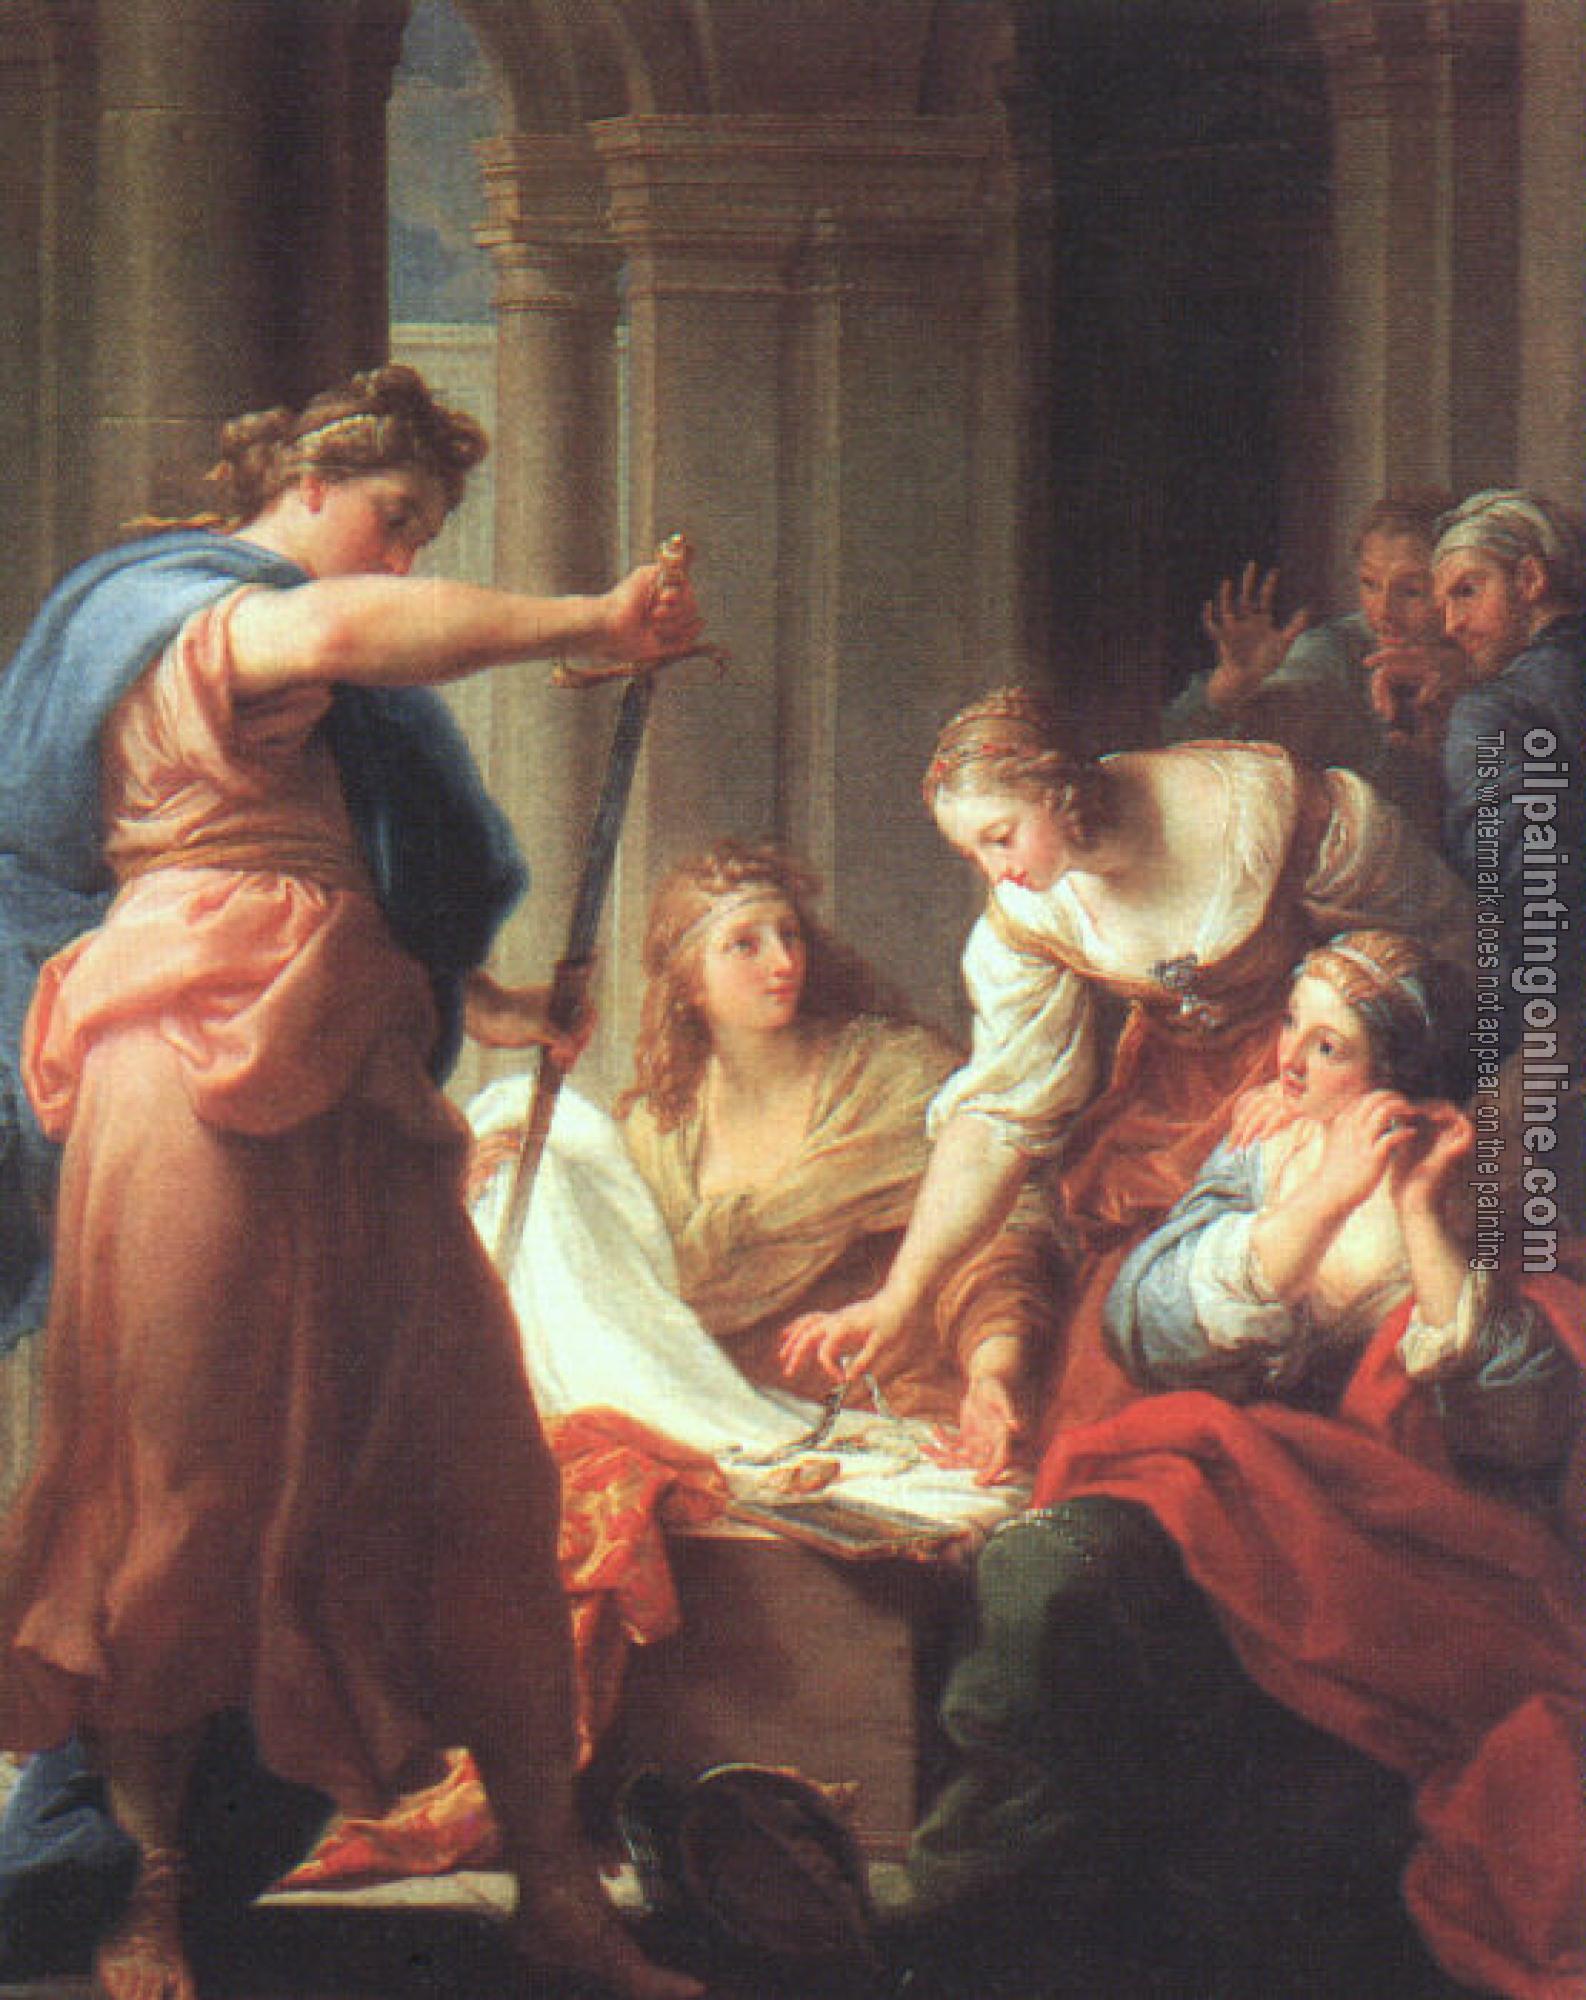 Batoni, Pompeo - Graphic Achilles at the Court of Lycomedes